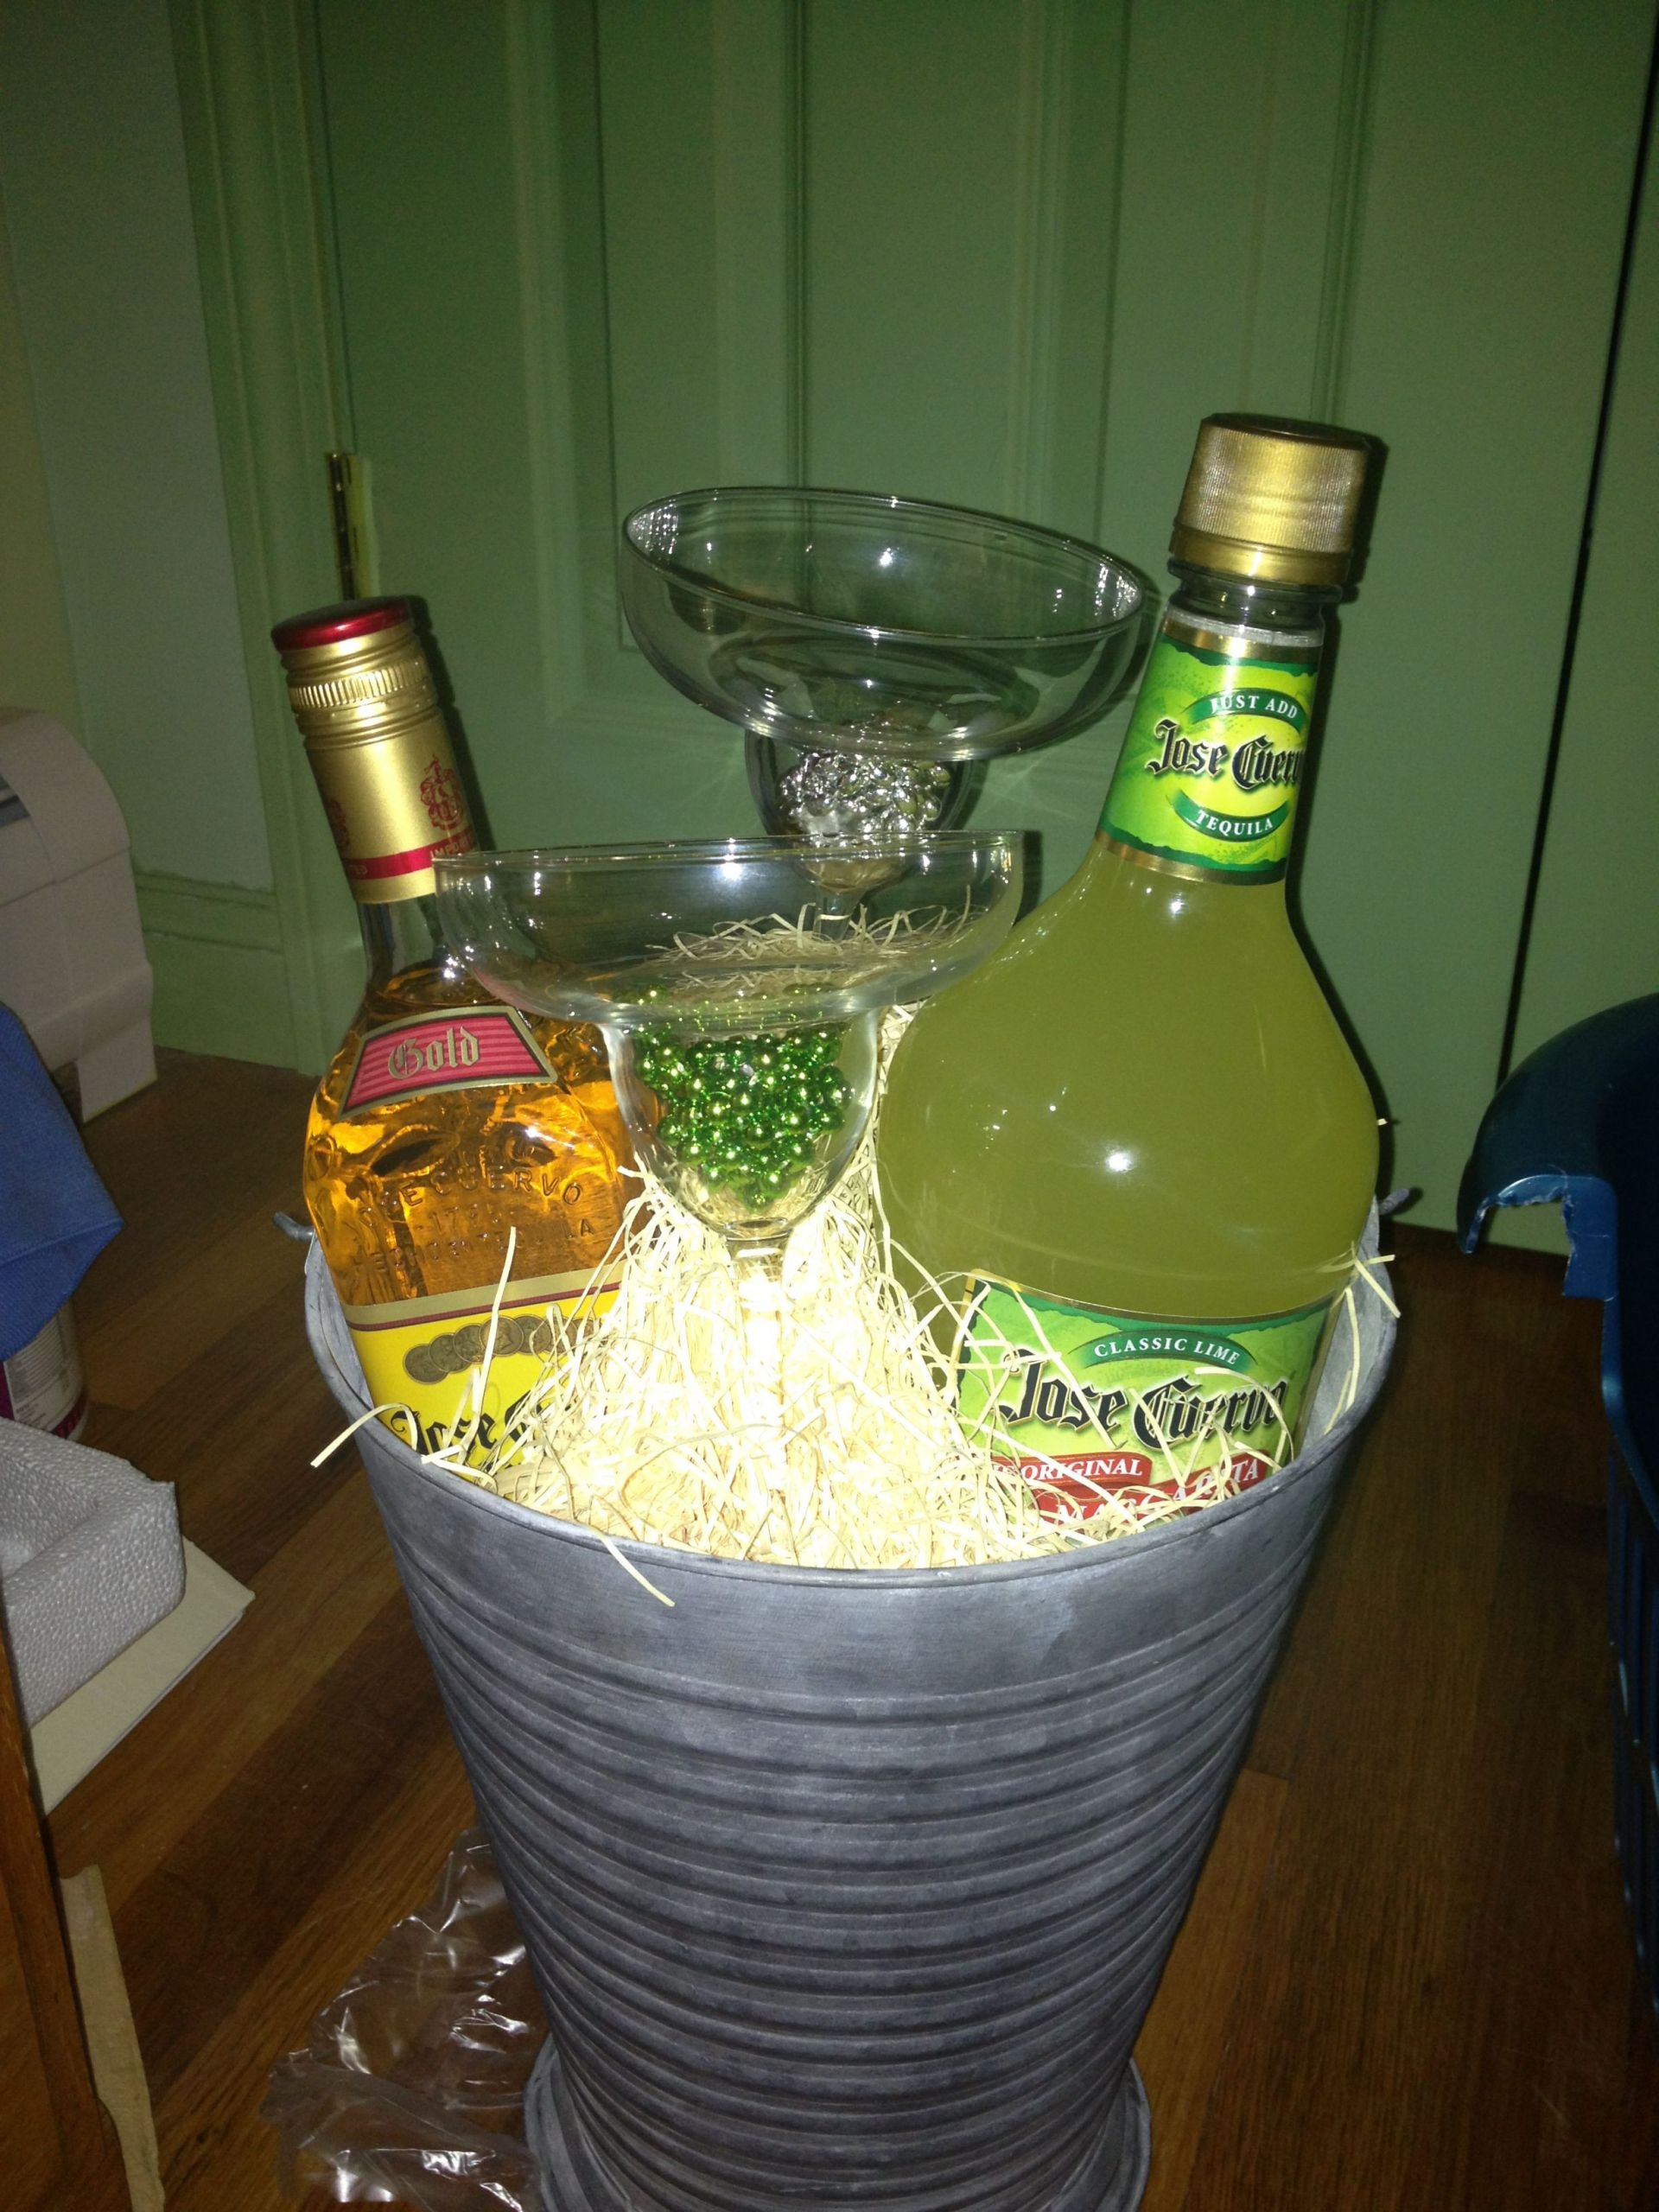 Gift Baskets Ideas For Work
 Margarita basket for a wedding present for a woman I work